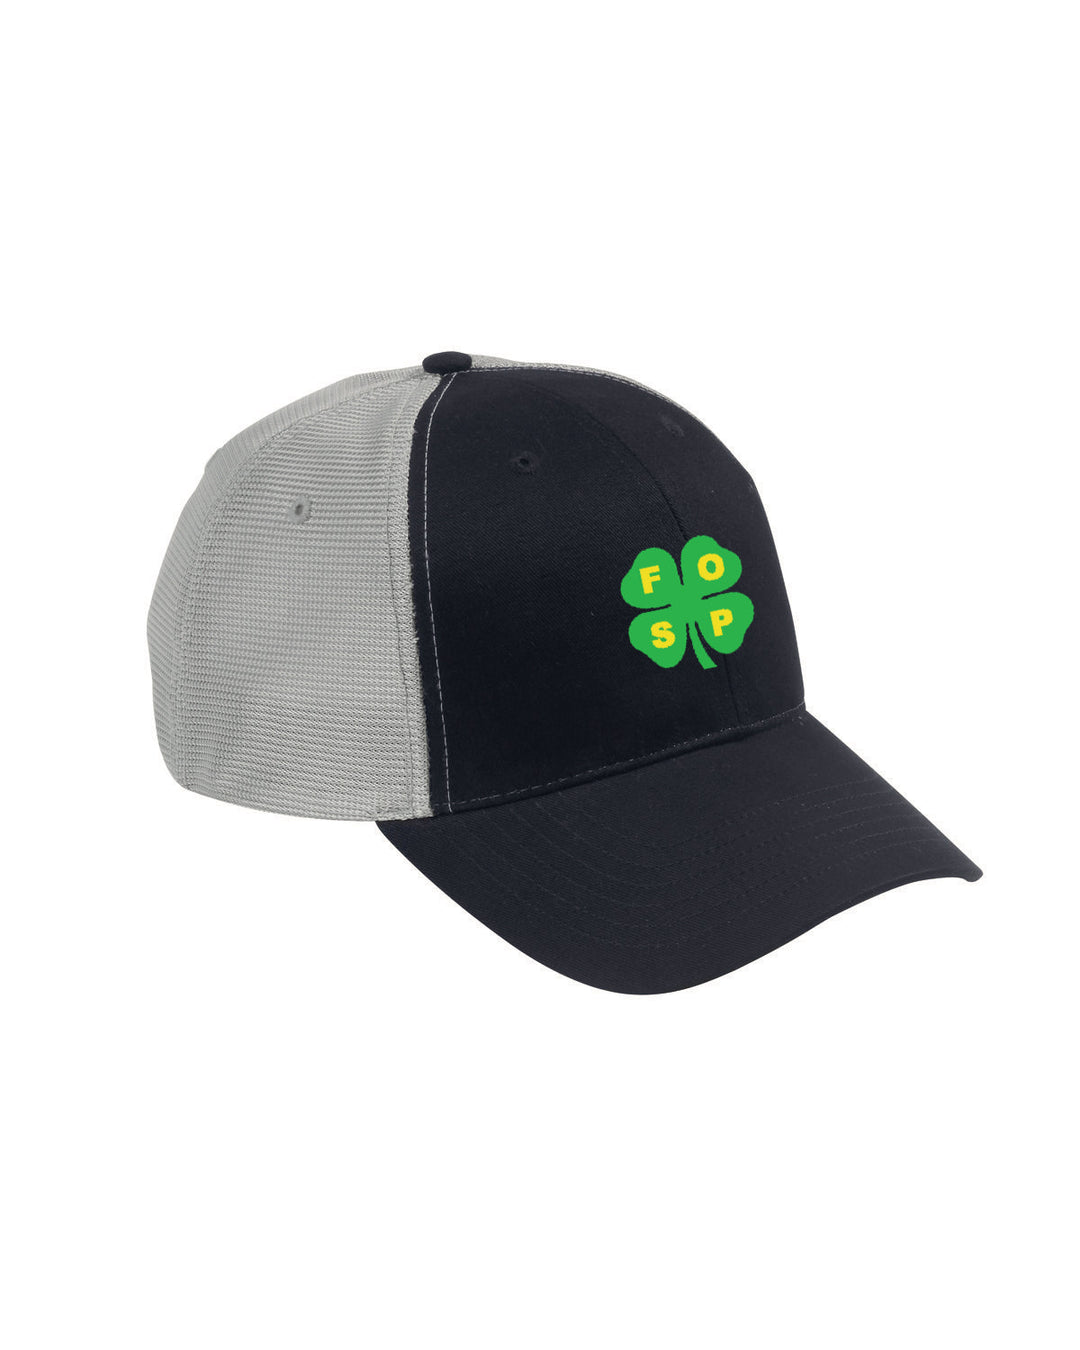 Friends of St. Patrick Old School Baseball Cap with Technical Mesh(OSTM)